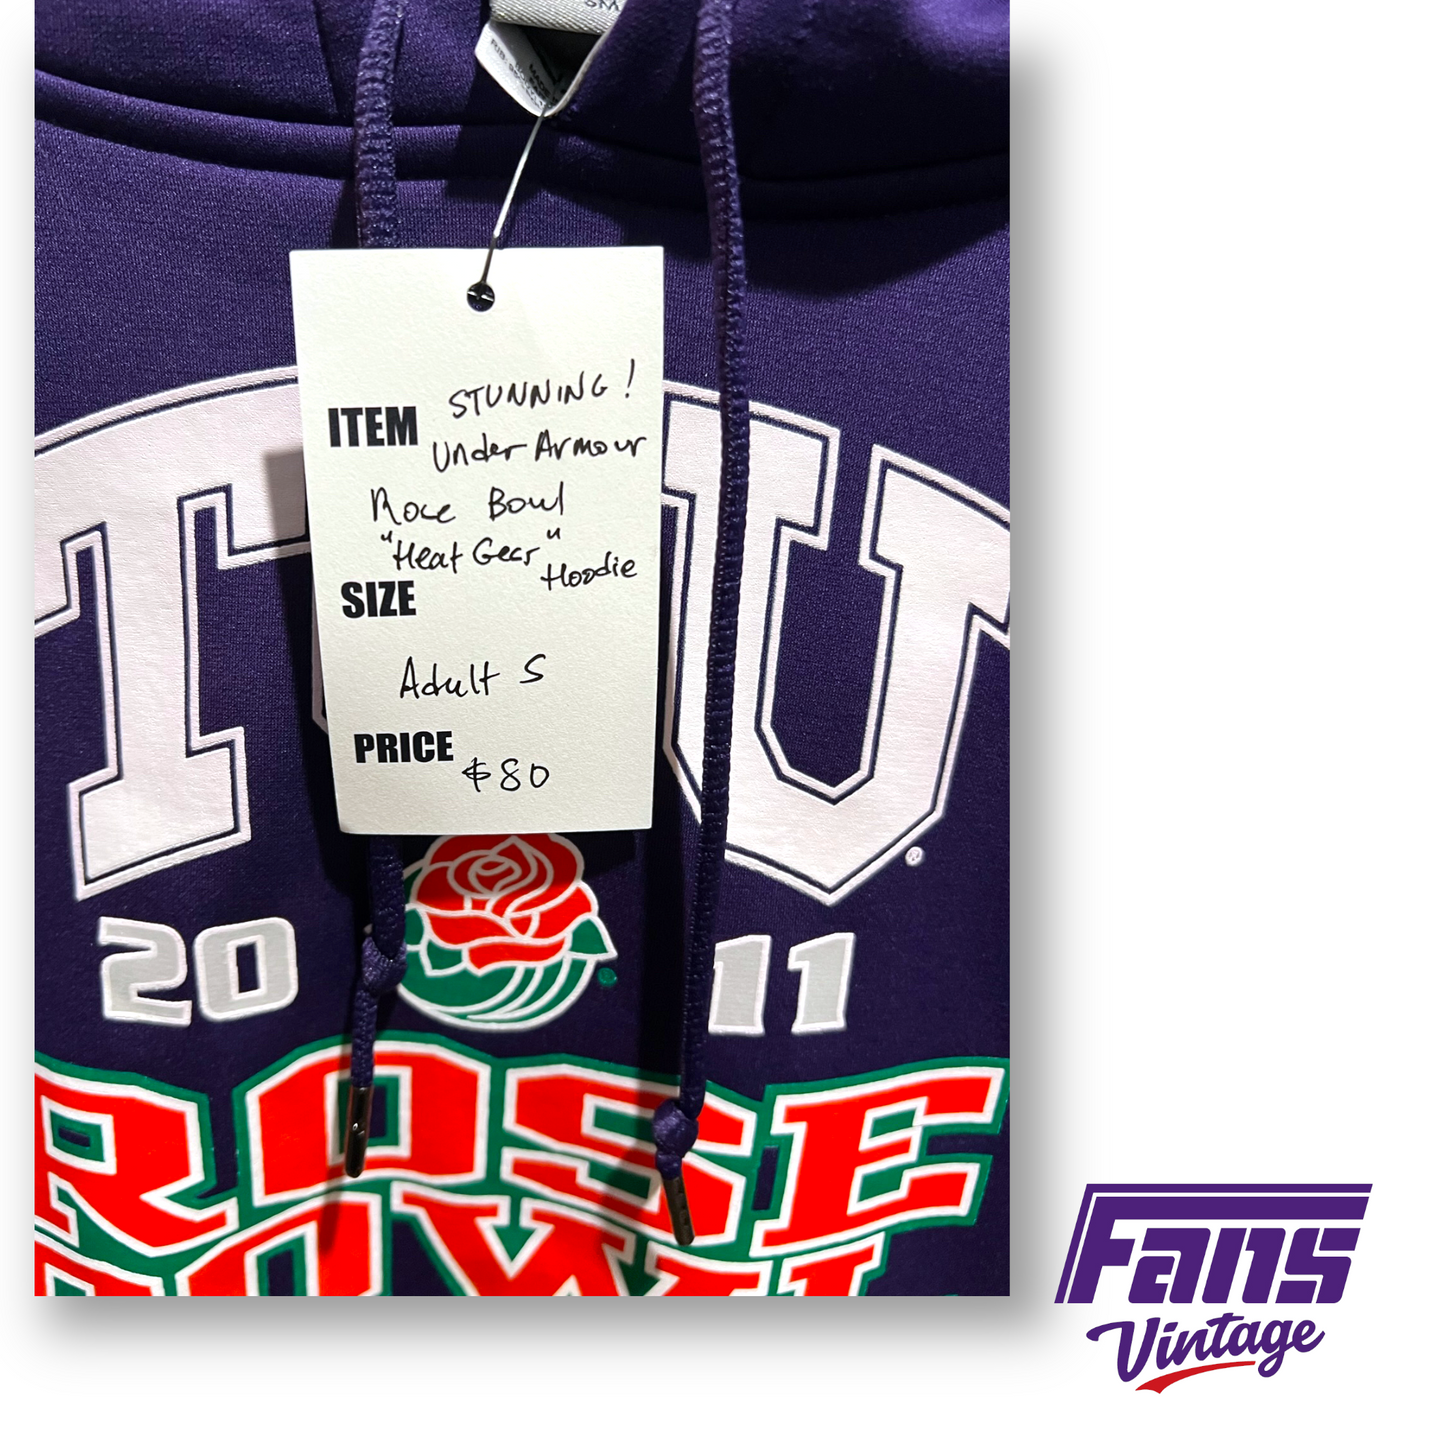 Awesome TCU Rose Bowl Under Armour Hoodie